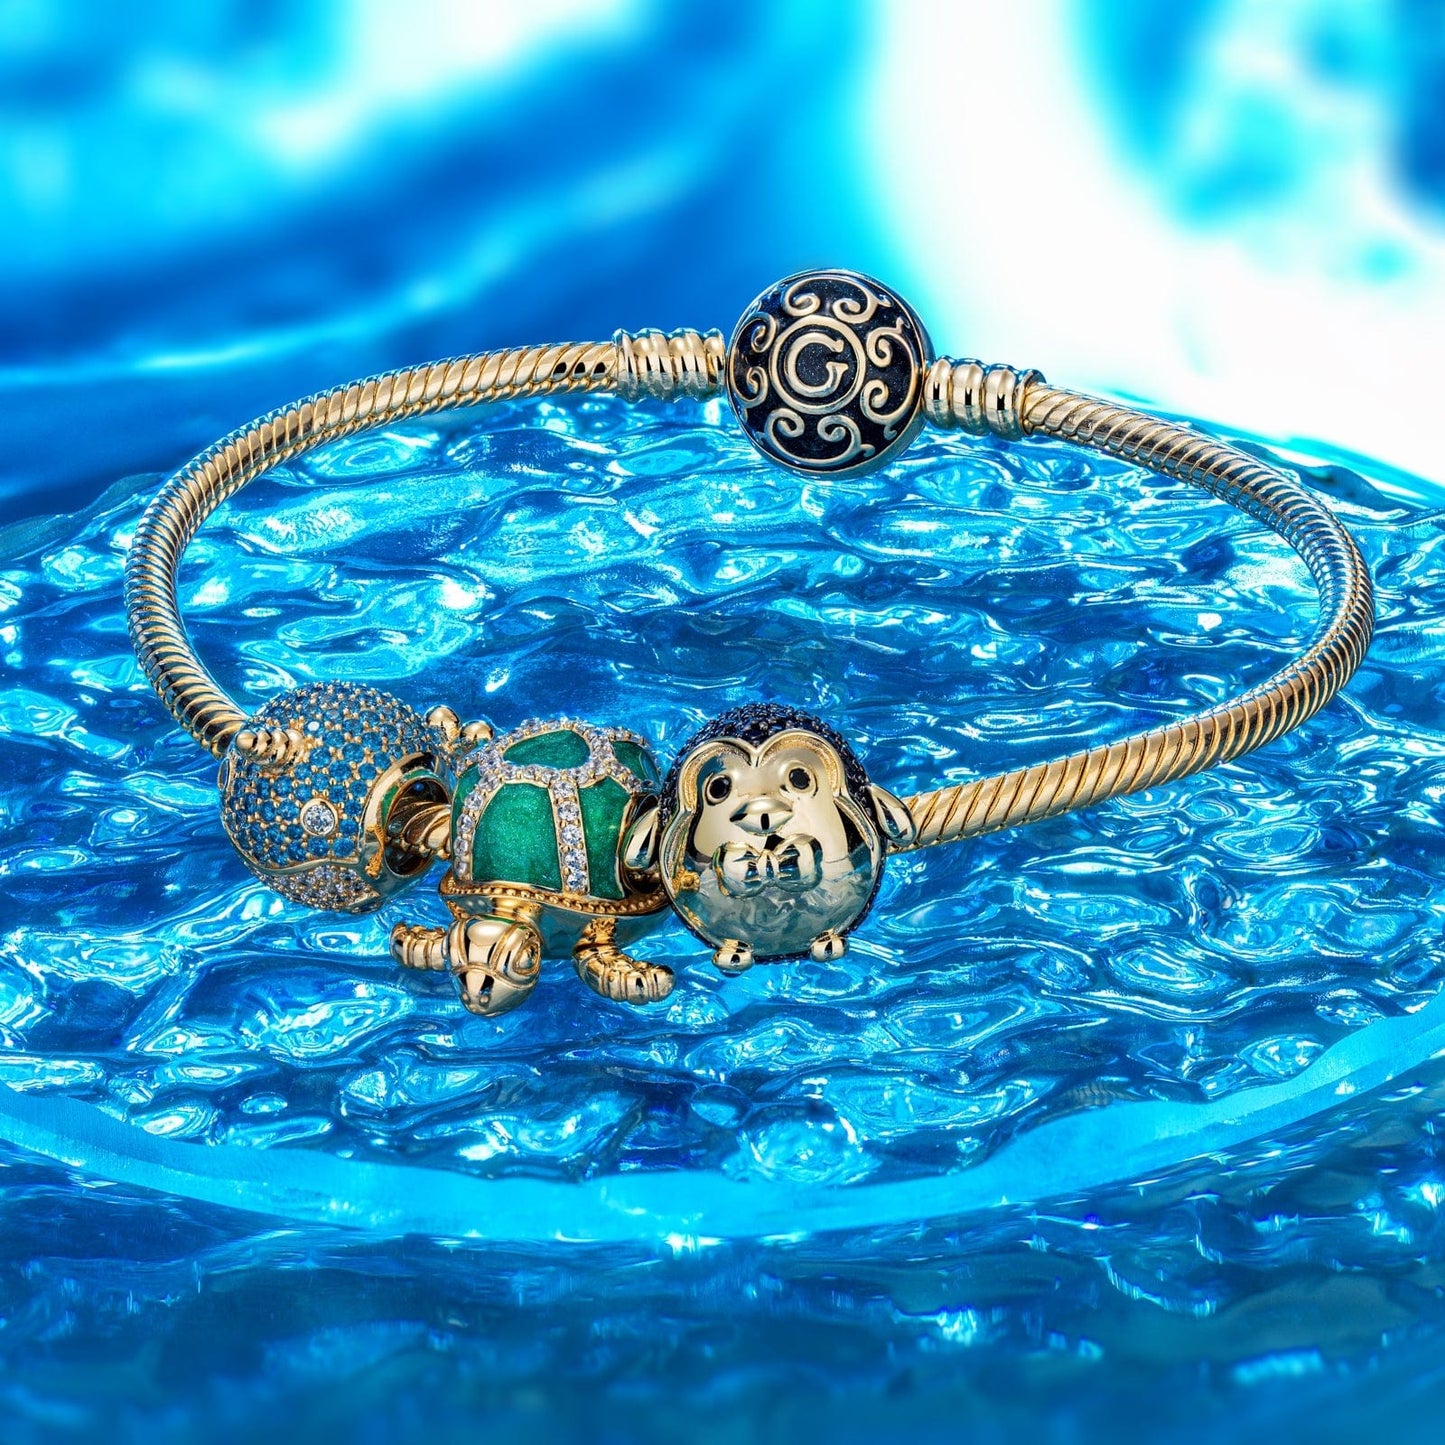 Cute Green Turtle Tarnish-resistant Silver Charms With Enamel In 14K Gold Plated